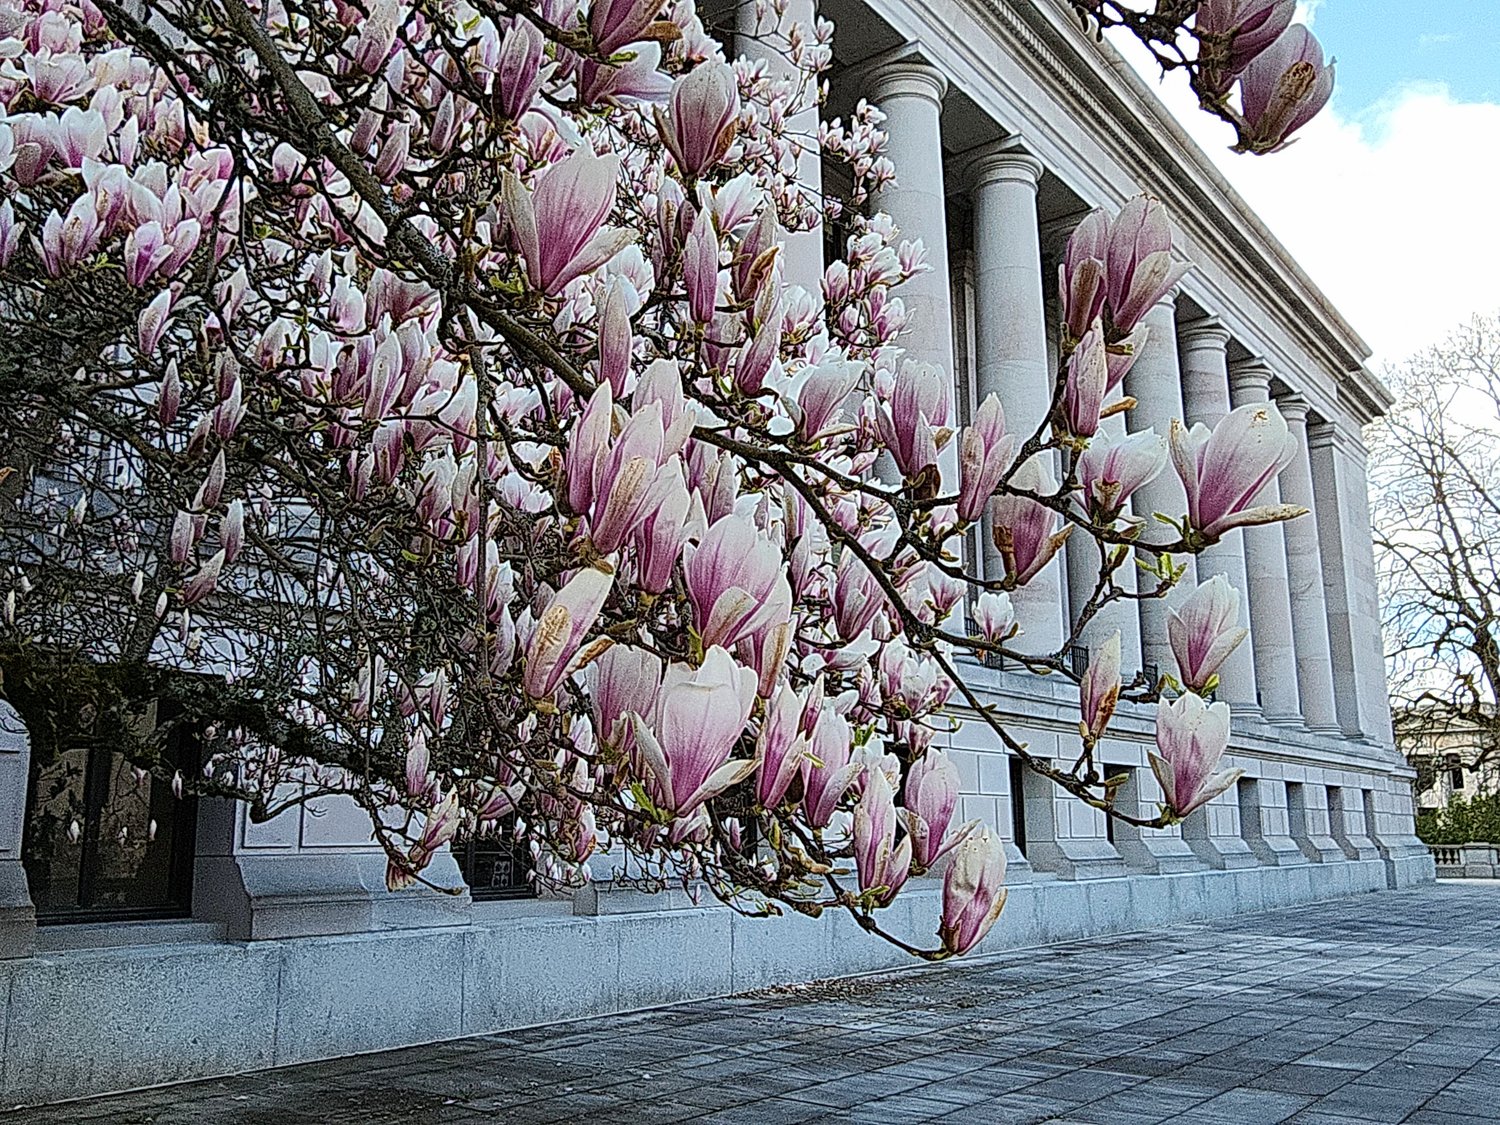 Saucer Magnolia at the State capitol building.